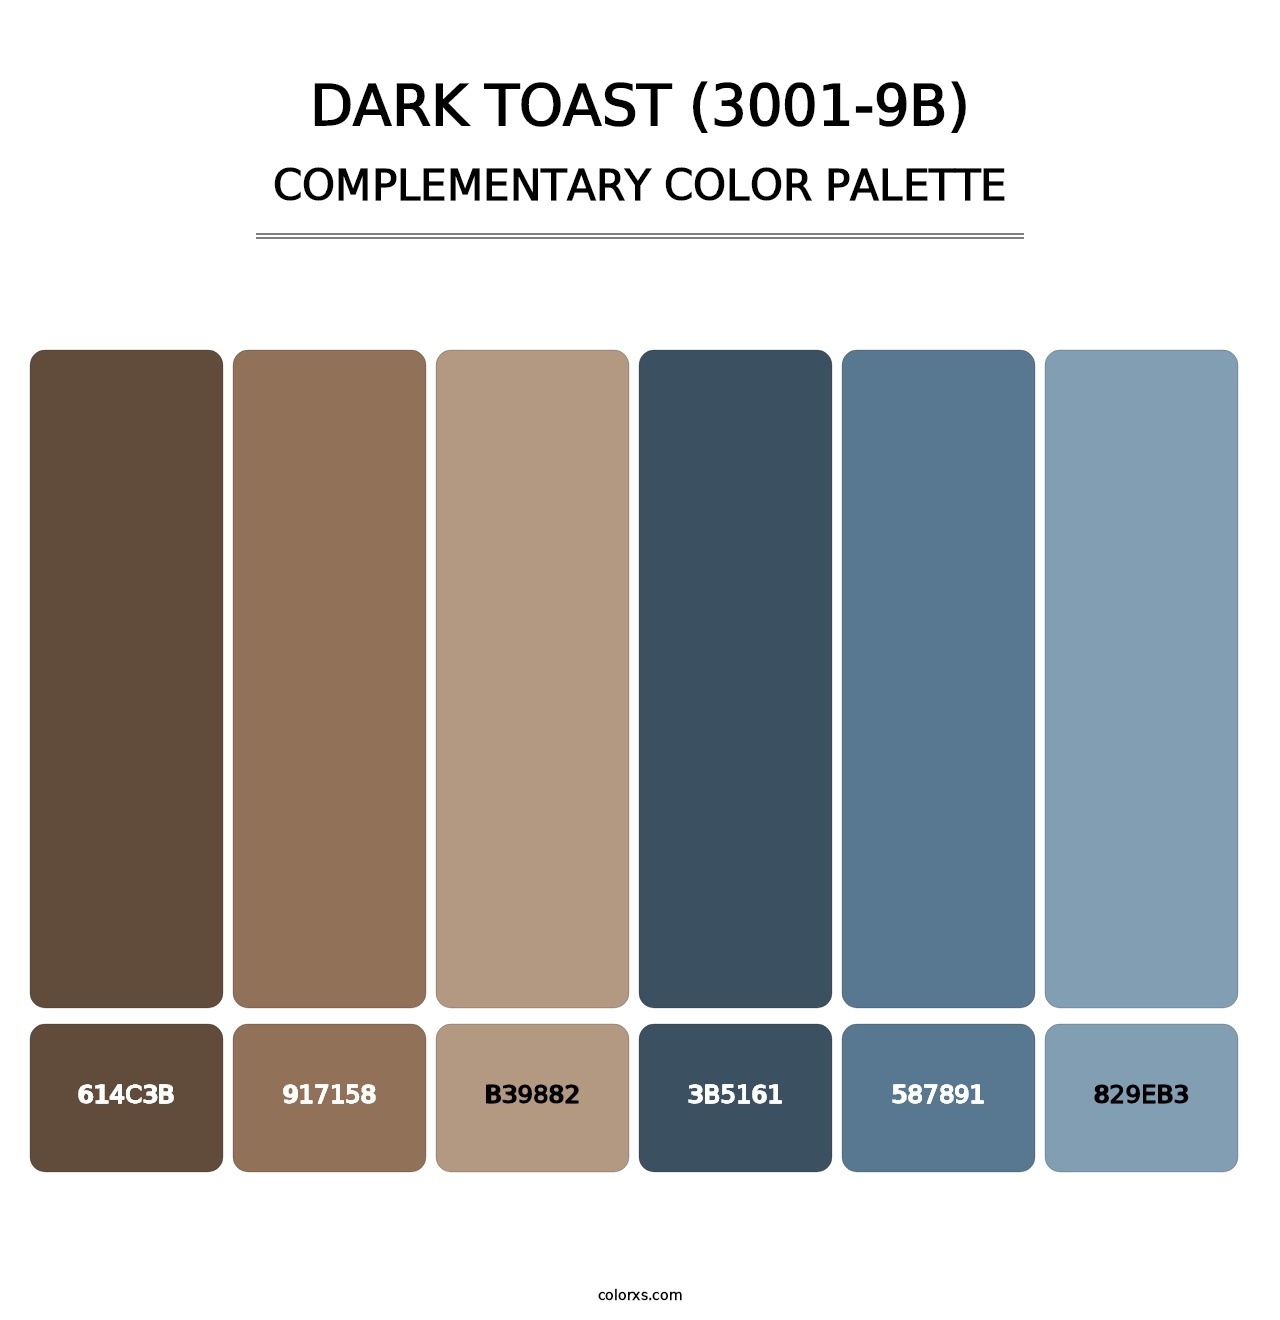 Dark Toast (3001-9B) - Complementary Color Palette